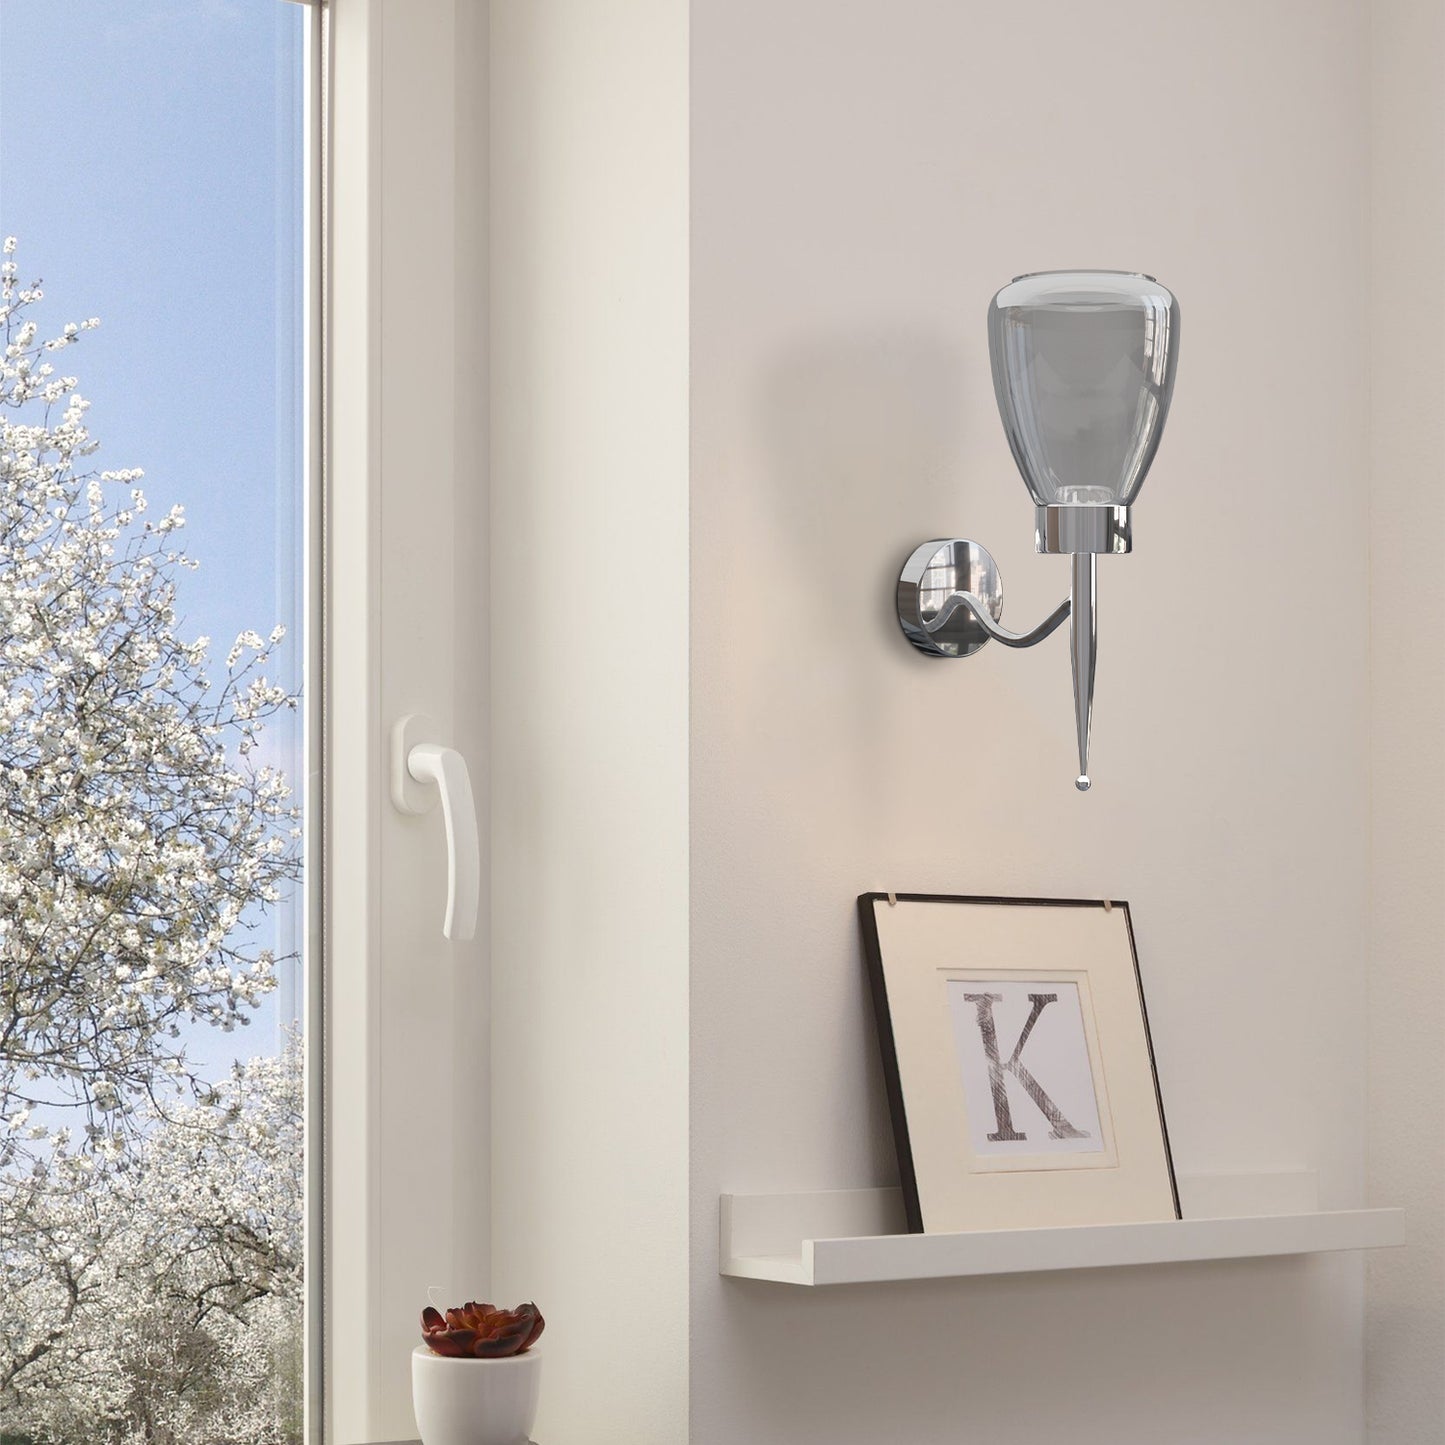  Modern Wall Light with Smoked Glass, Chrome Plate& Vase Shape – Perfect for Indoor Spaces, Living Rooms, Bedrooms,Restaurants & Cafés - Application Image 